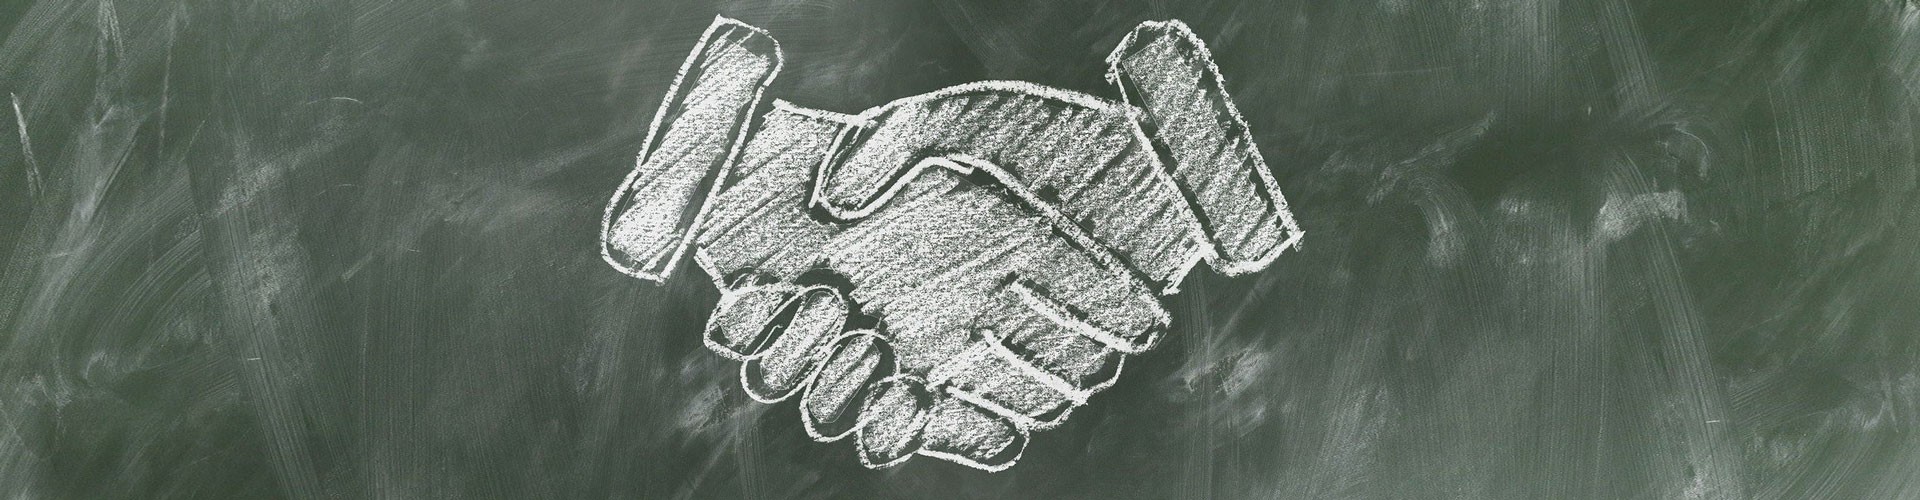 chalk board drawing of shaking hands